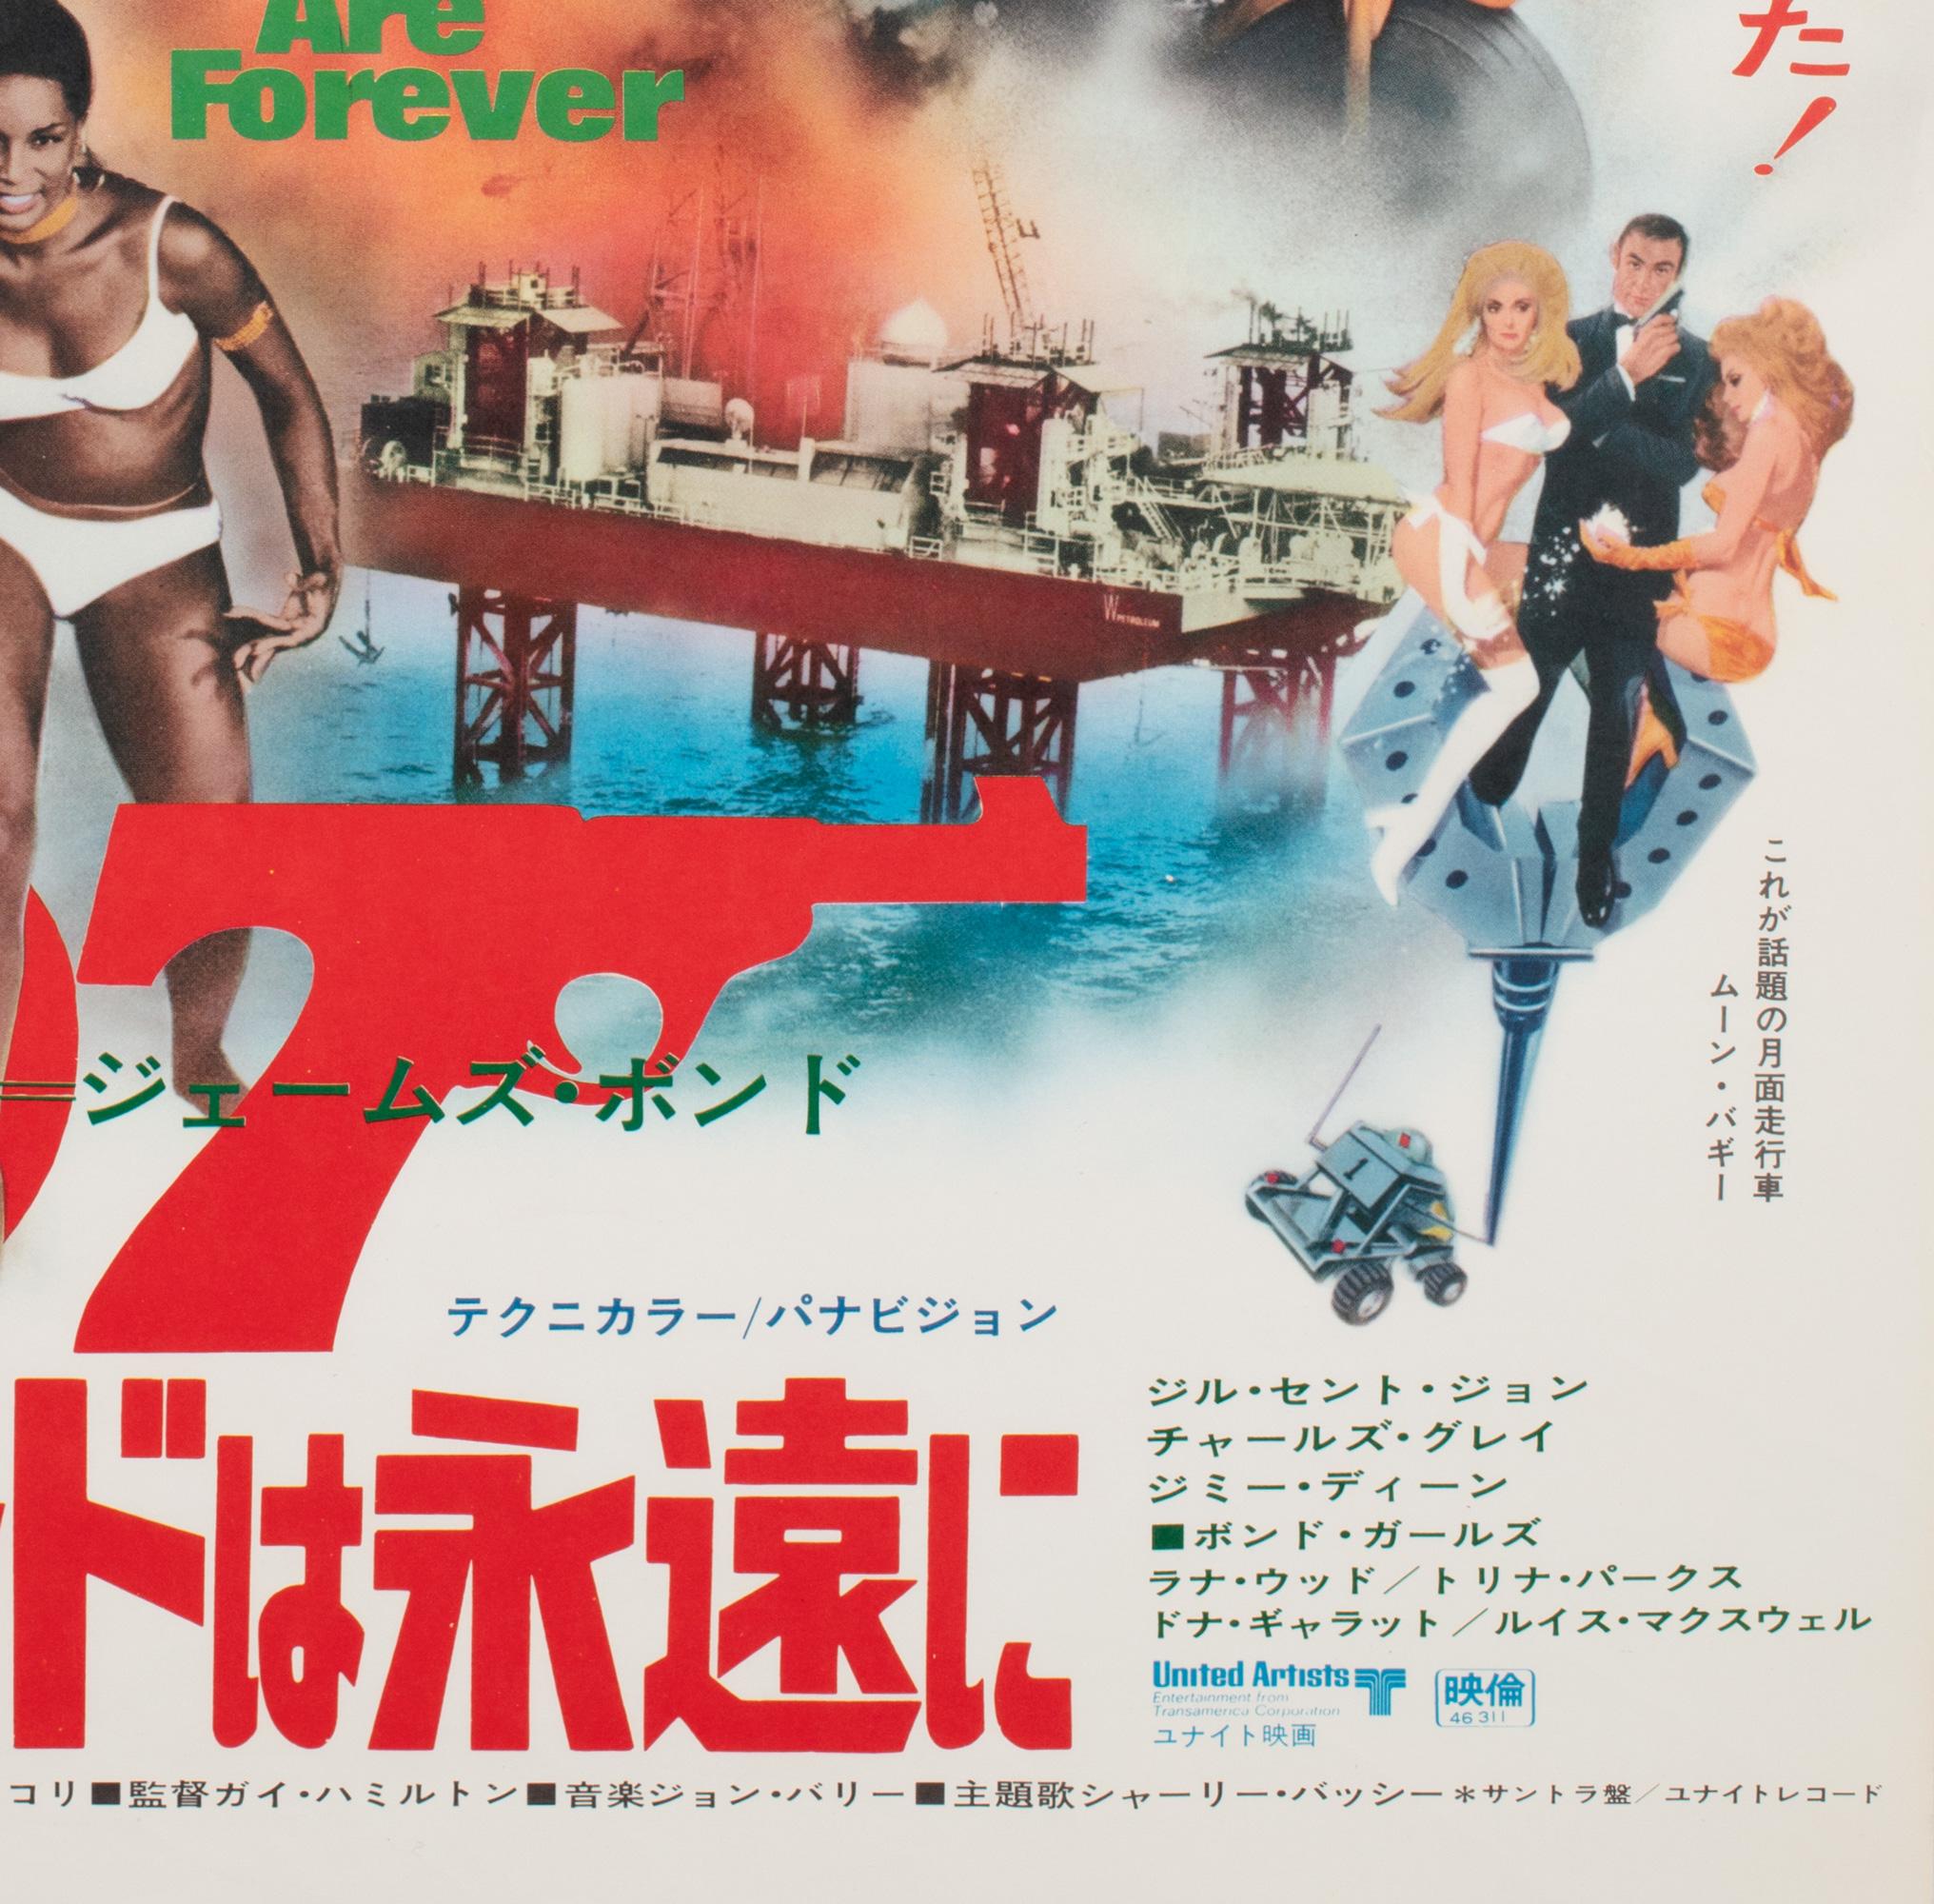 Diamonds Are Forever 1971 Japanese B2 Film Movie poster

The colourful montage artwork on the original-year-of-release poster for Diamonds Are Forever is cracking. One of many great Japanese Bond posters that we have in our new collection.

This